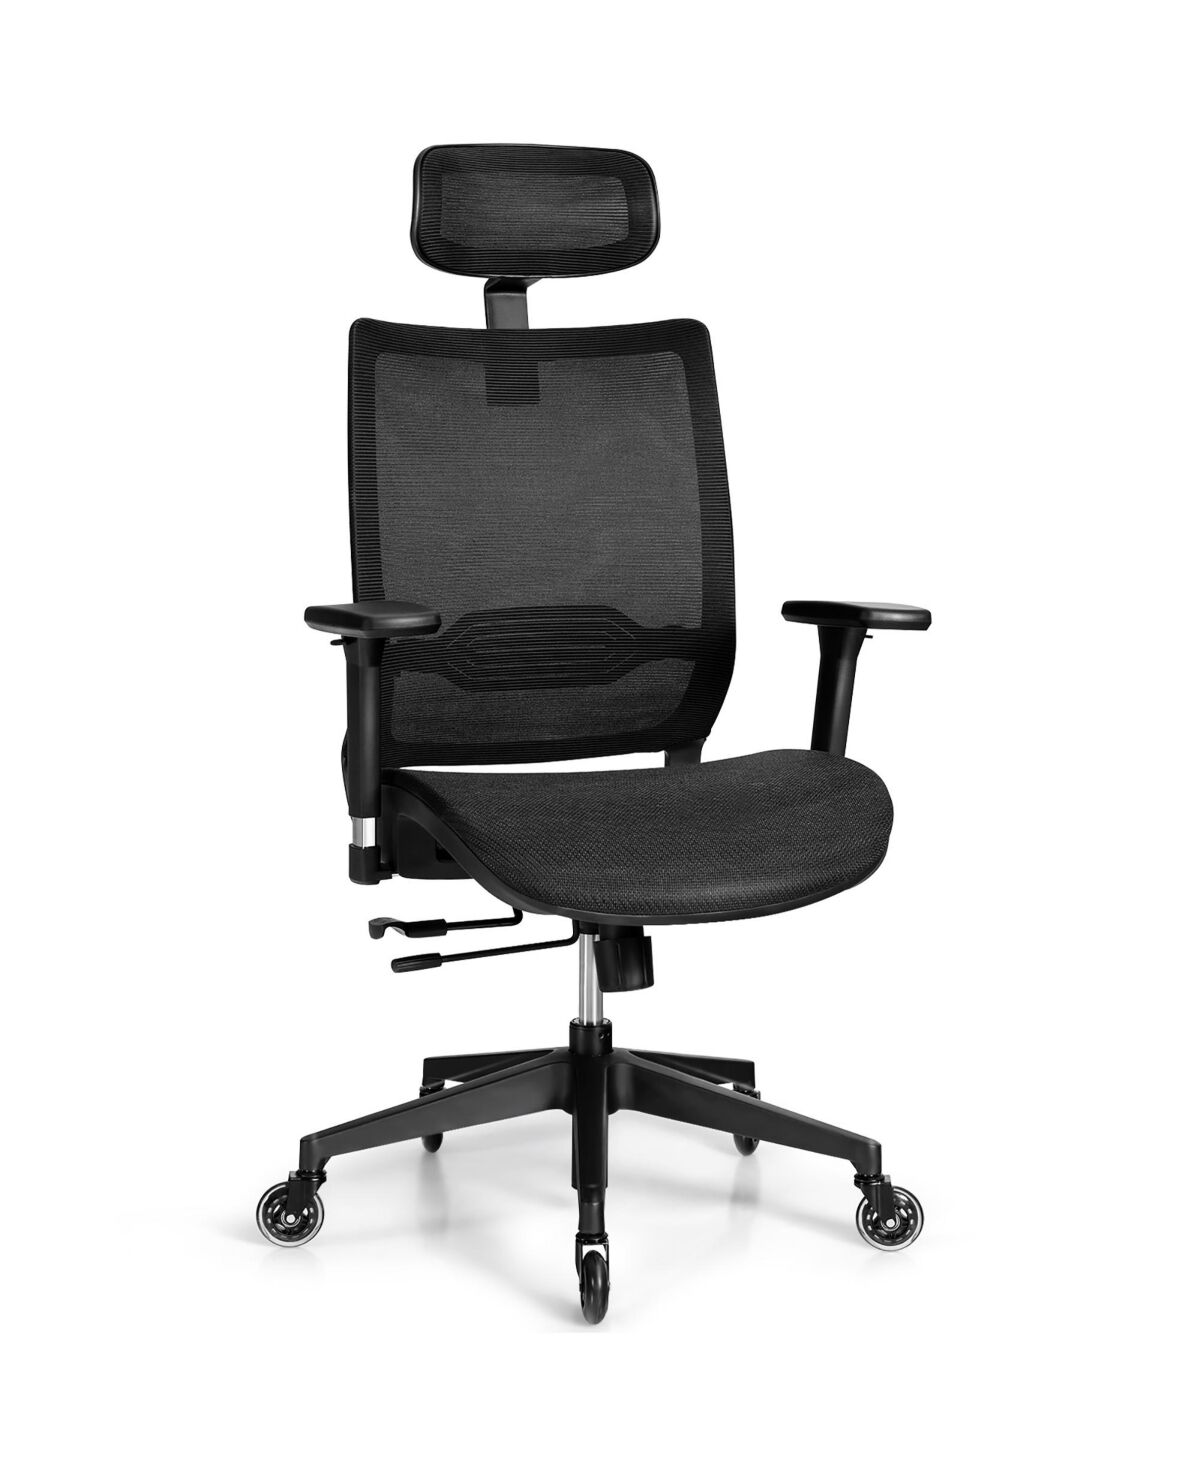 Costway Office Chair Adjustable Mesh Computer Chair with Sliding Seat - Black